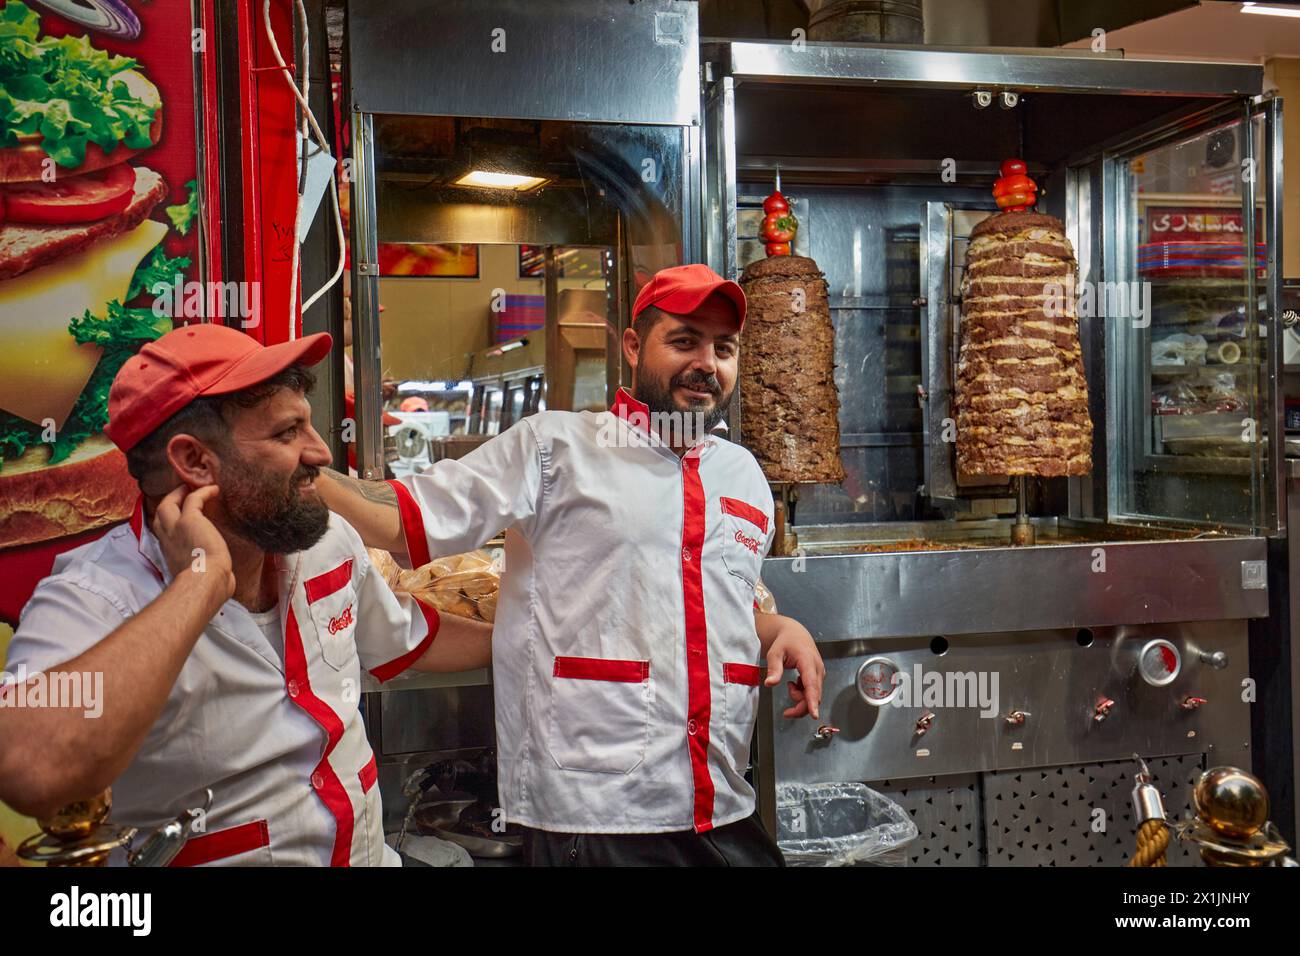 Portrait of two Iranian chefs making shawarma, traditional Middle Eastern street food, in the historic center of Isfahan, Iran. Stock Photo